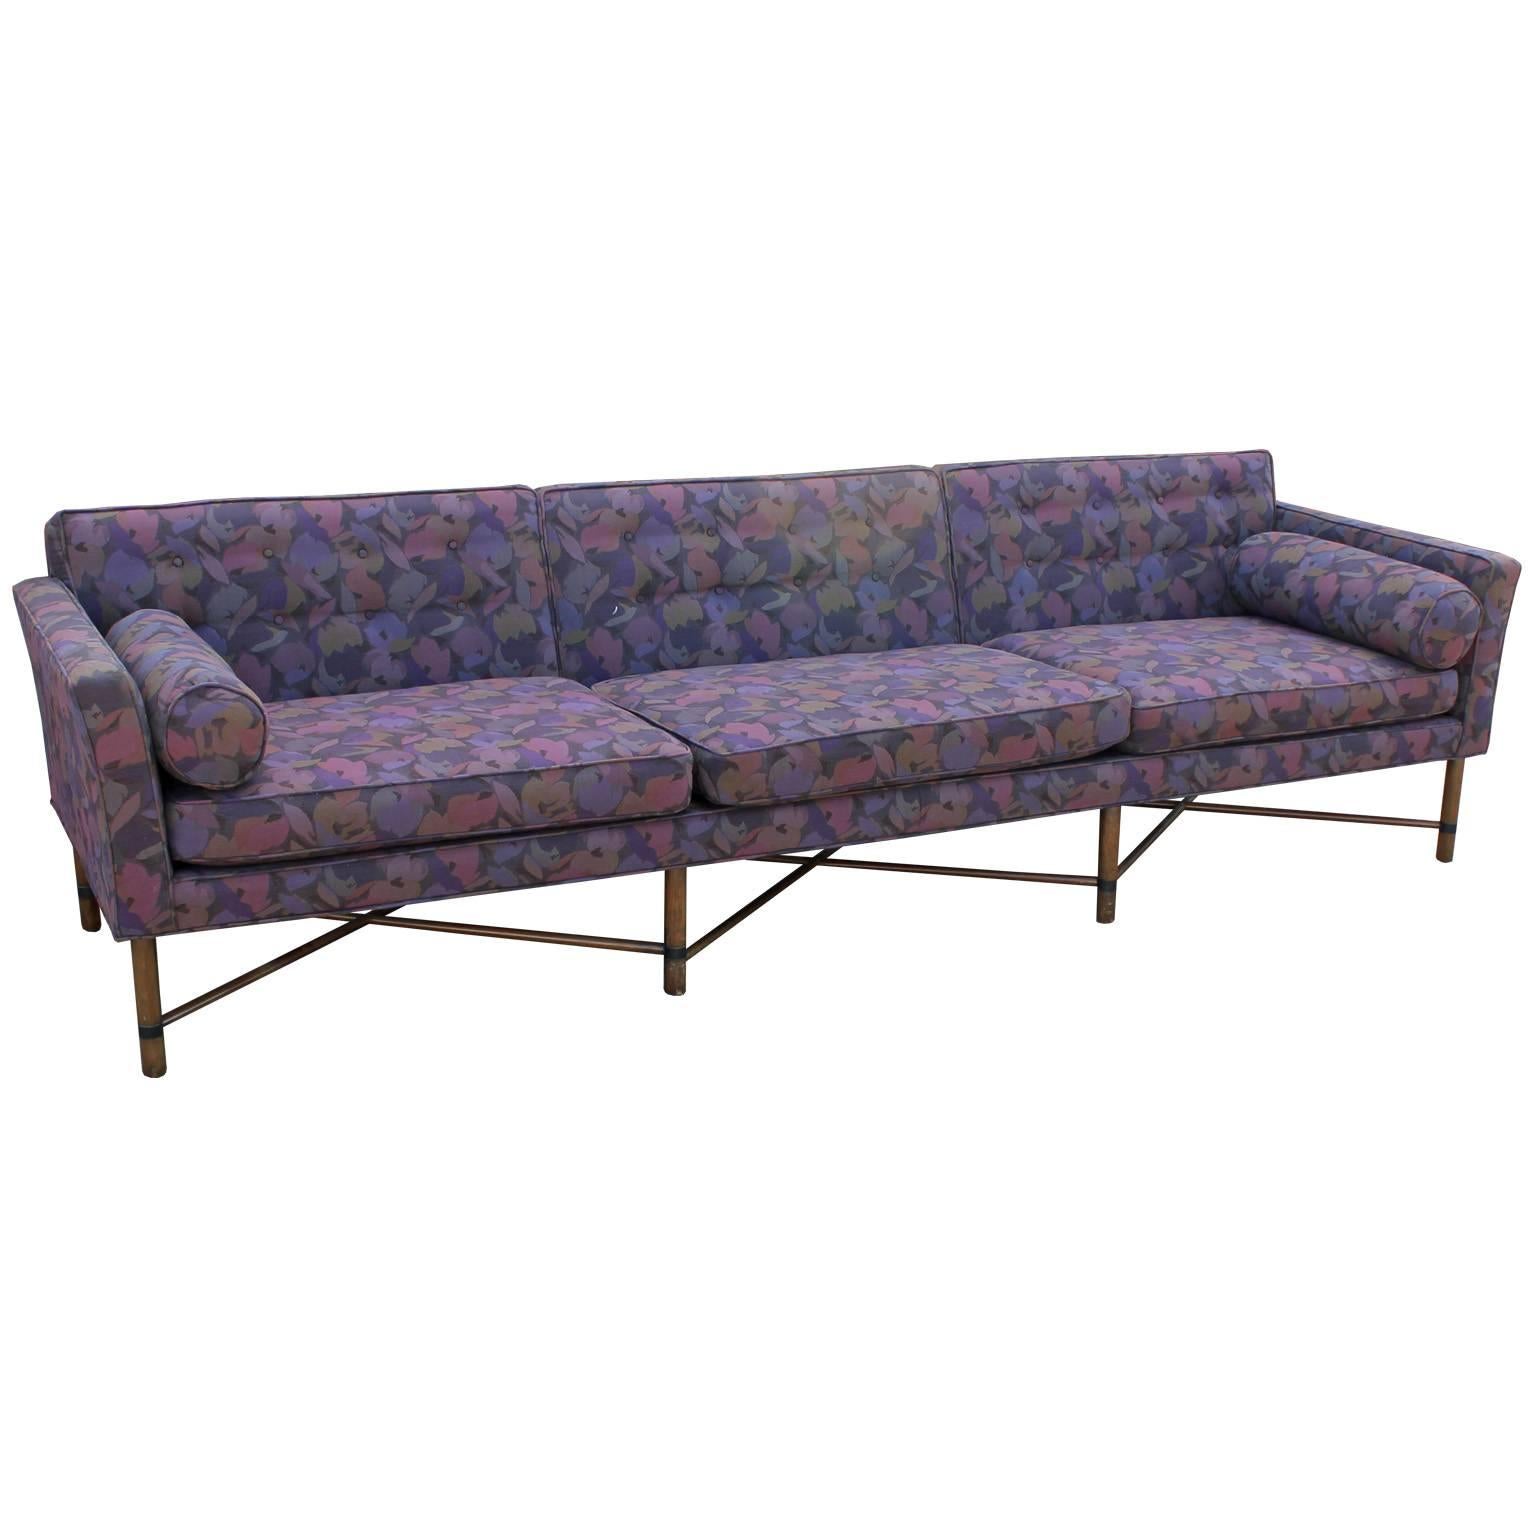 Mid-Century Modern Harvey Probber Seating Group Vintage Modern Sofa and Loveseat in Purple Floral